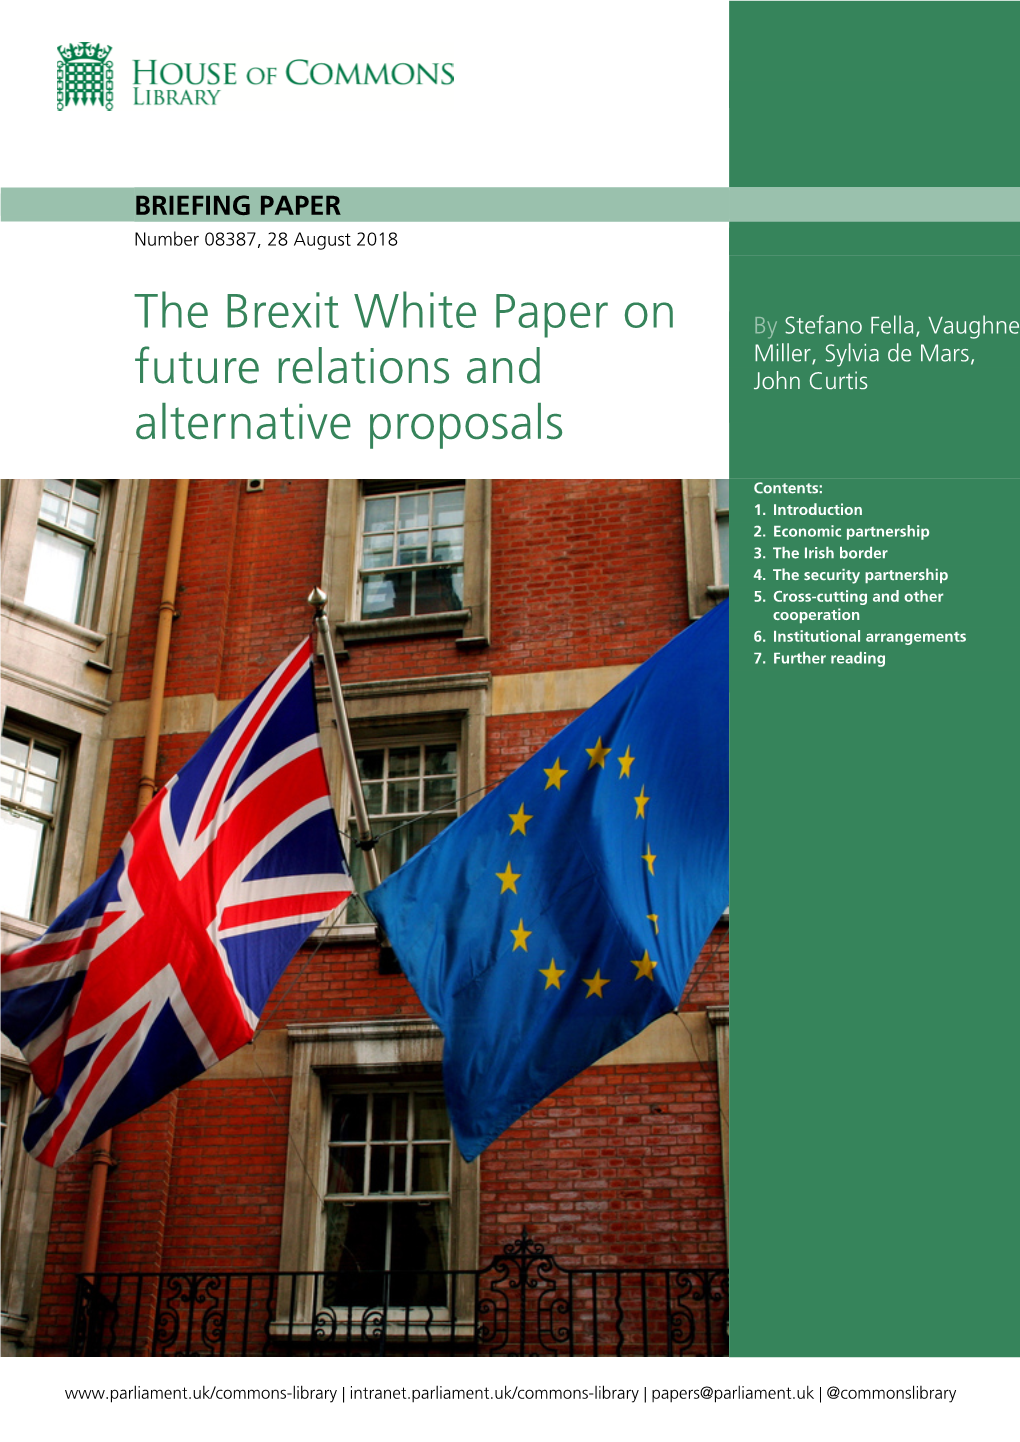 The Brexit White Paper on Future Relations and Alternative Proposals